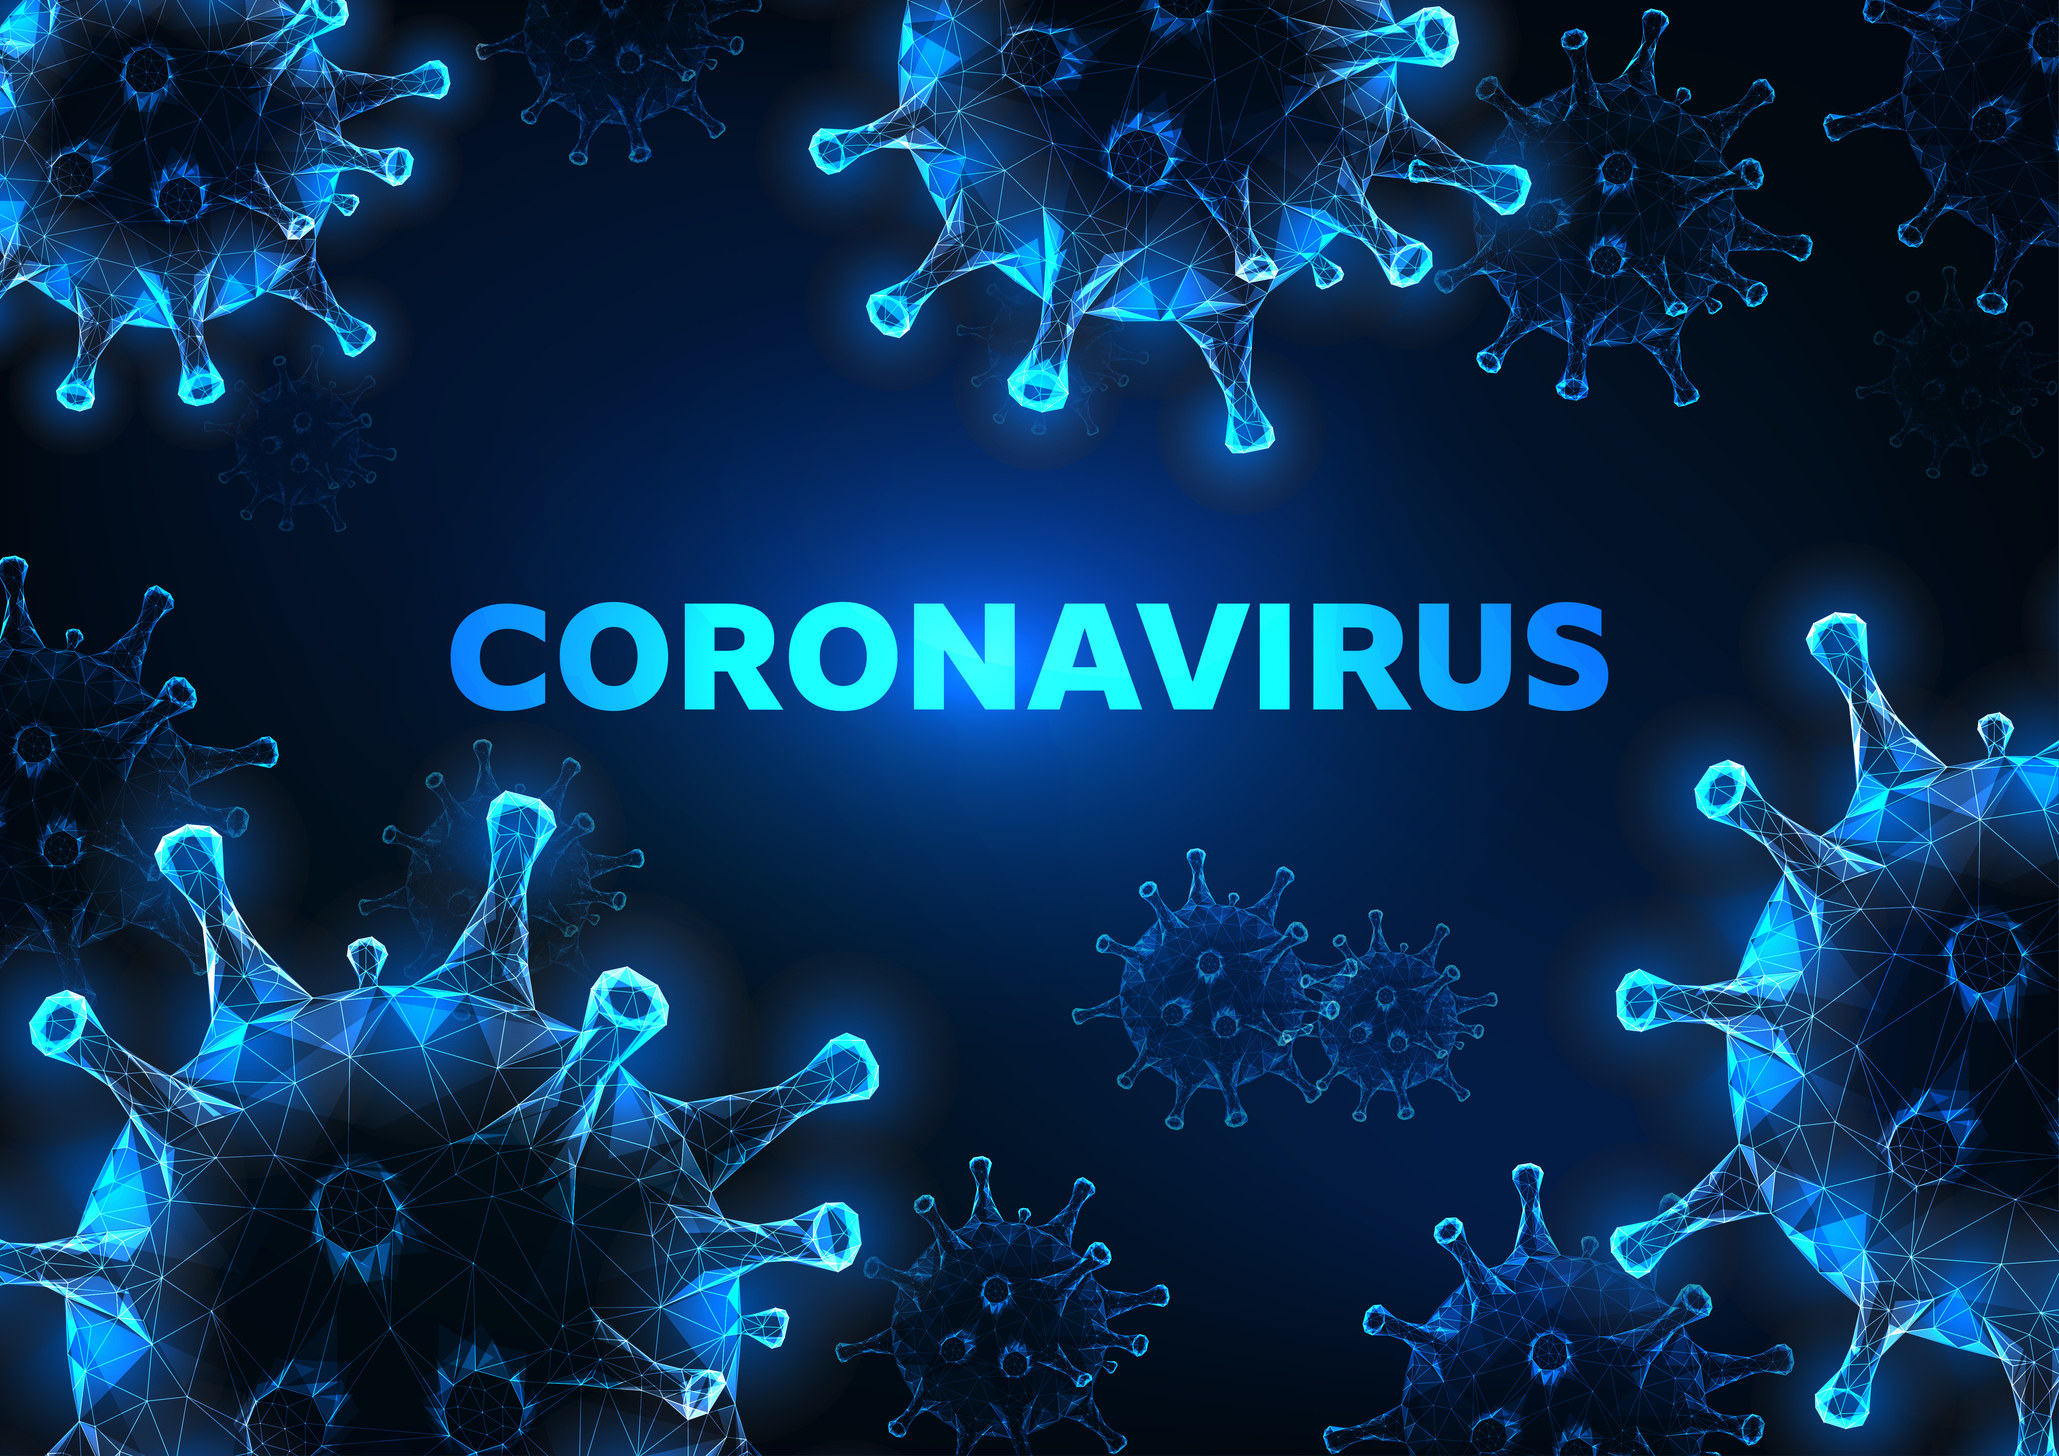 Blue Coronavirus cells with abstract background